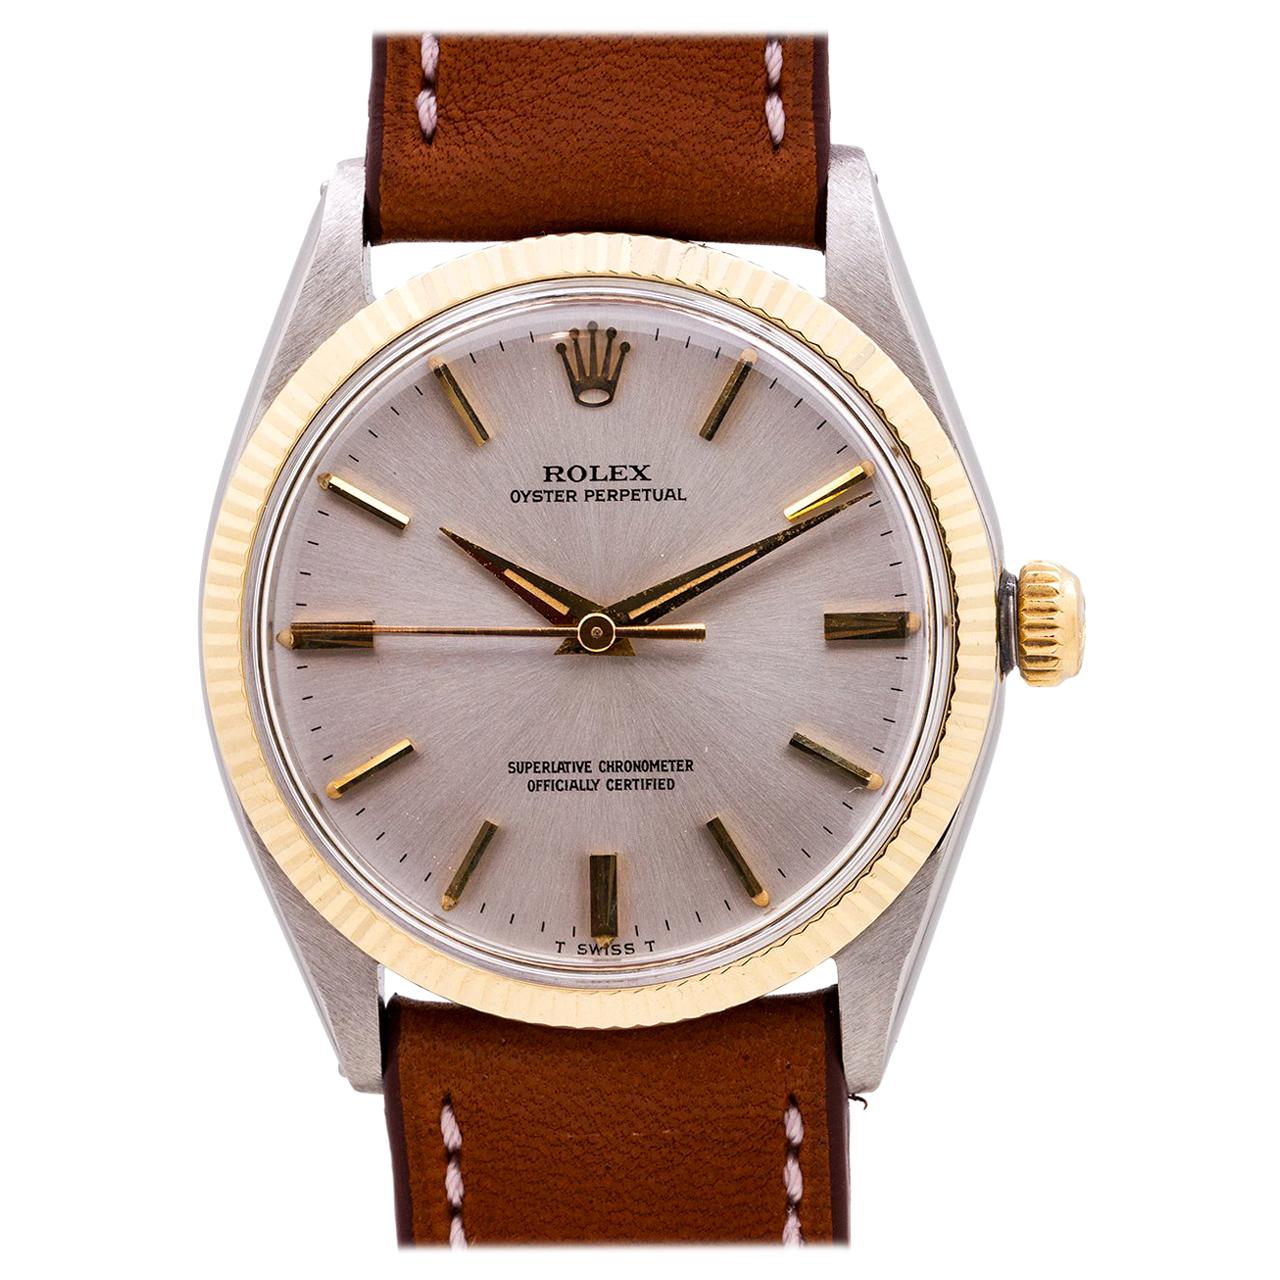 Rolex Oyster Perpetual Stainless Steel & 14K Yellow Gold ref 1005 circa 1966